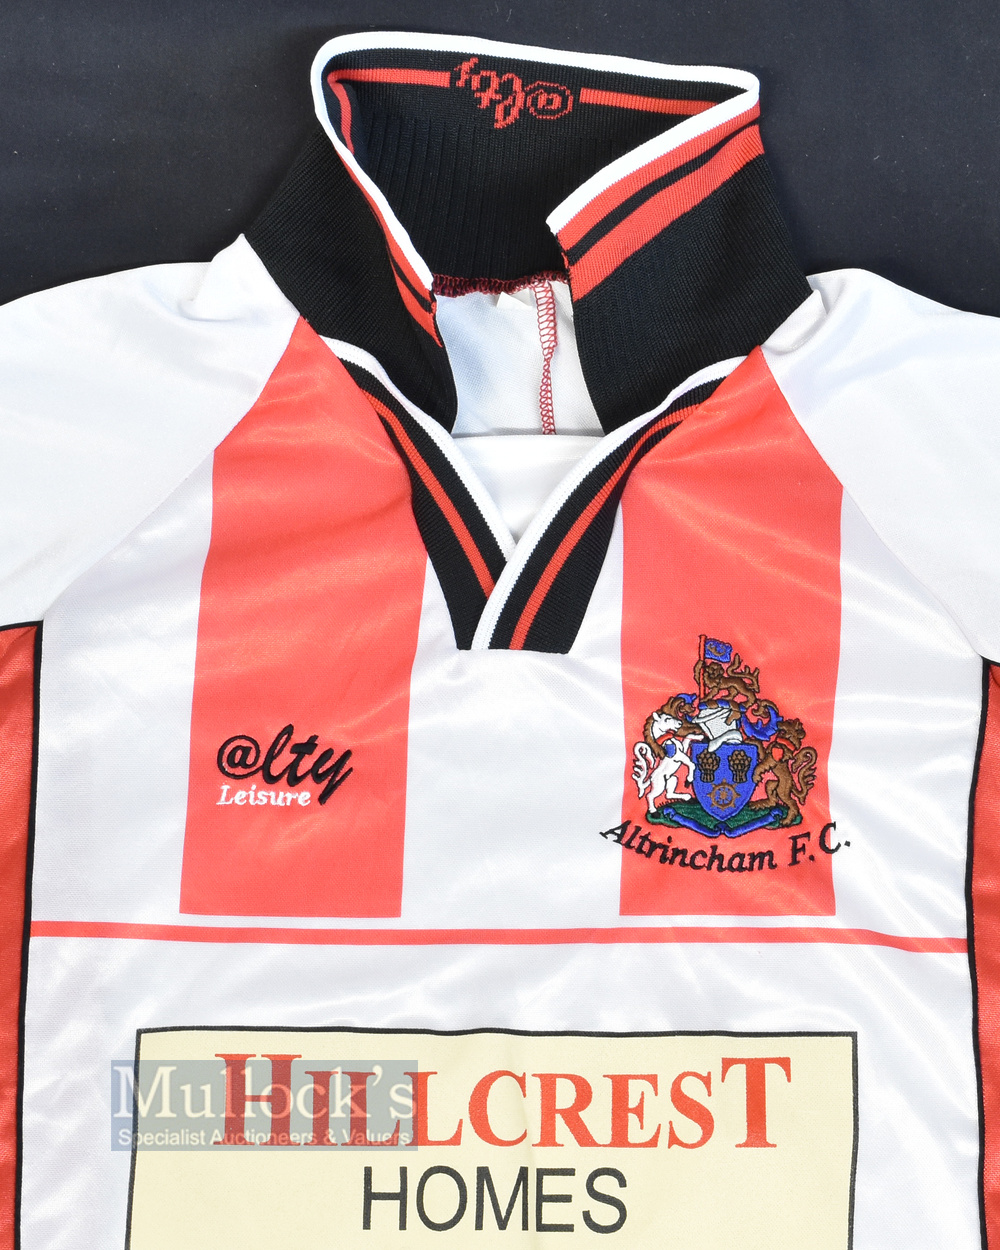 2002/03 Altrincham FC Home Football Shirt Hillcrest Homes, size L, white and red, short sleeve - Image 2 of 2